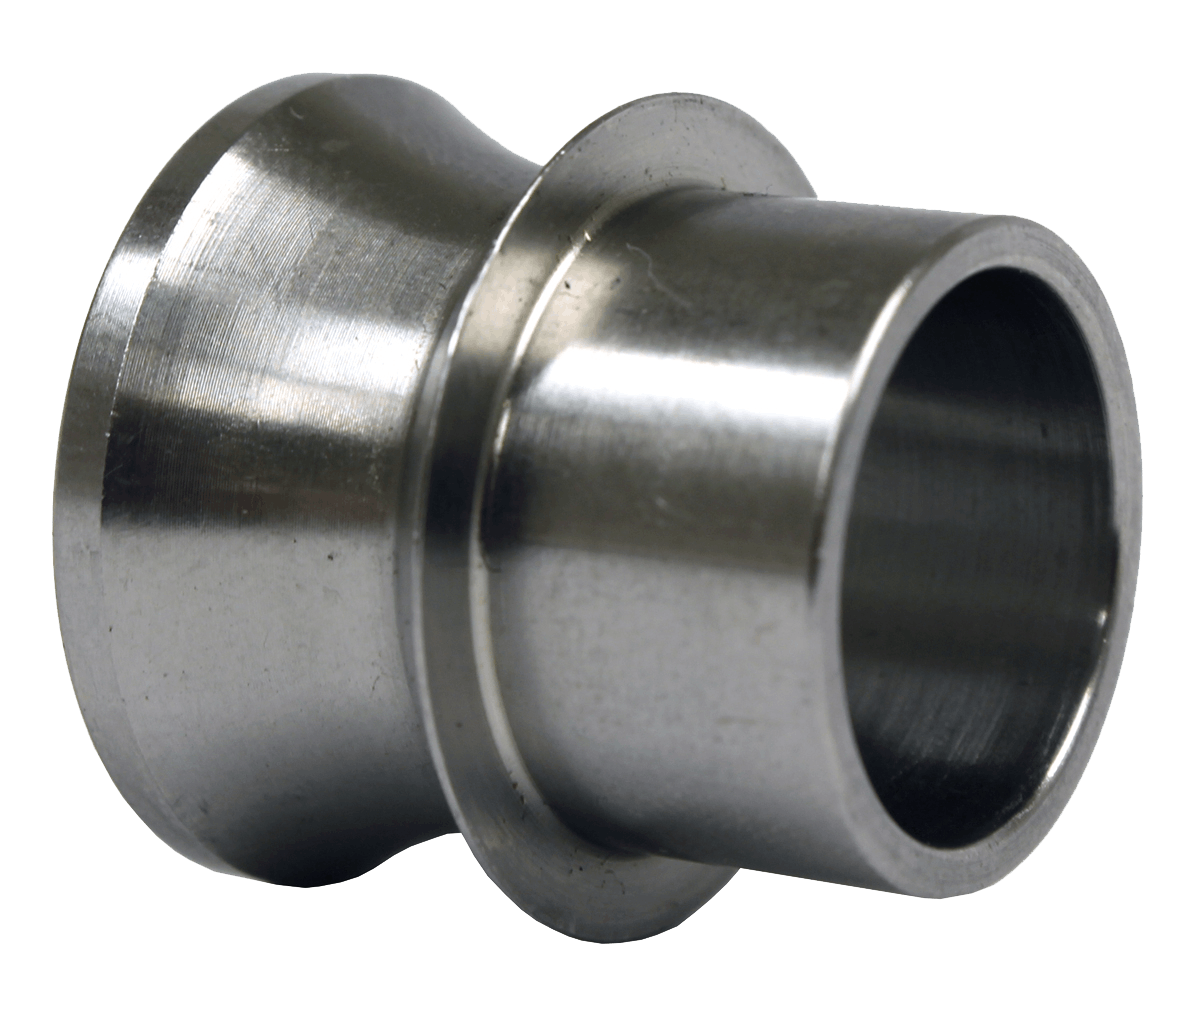 QA1 SN14-99 High Misalignment Spacer, .875 inch Od Ss, .563 inch X 2 inch Total Width